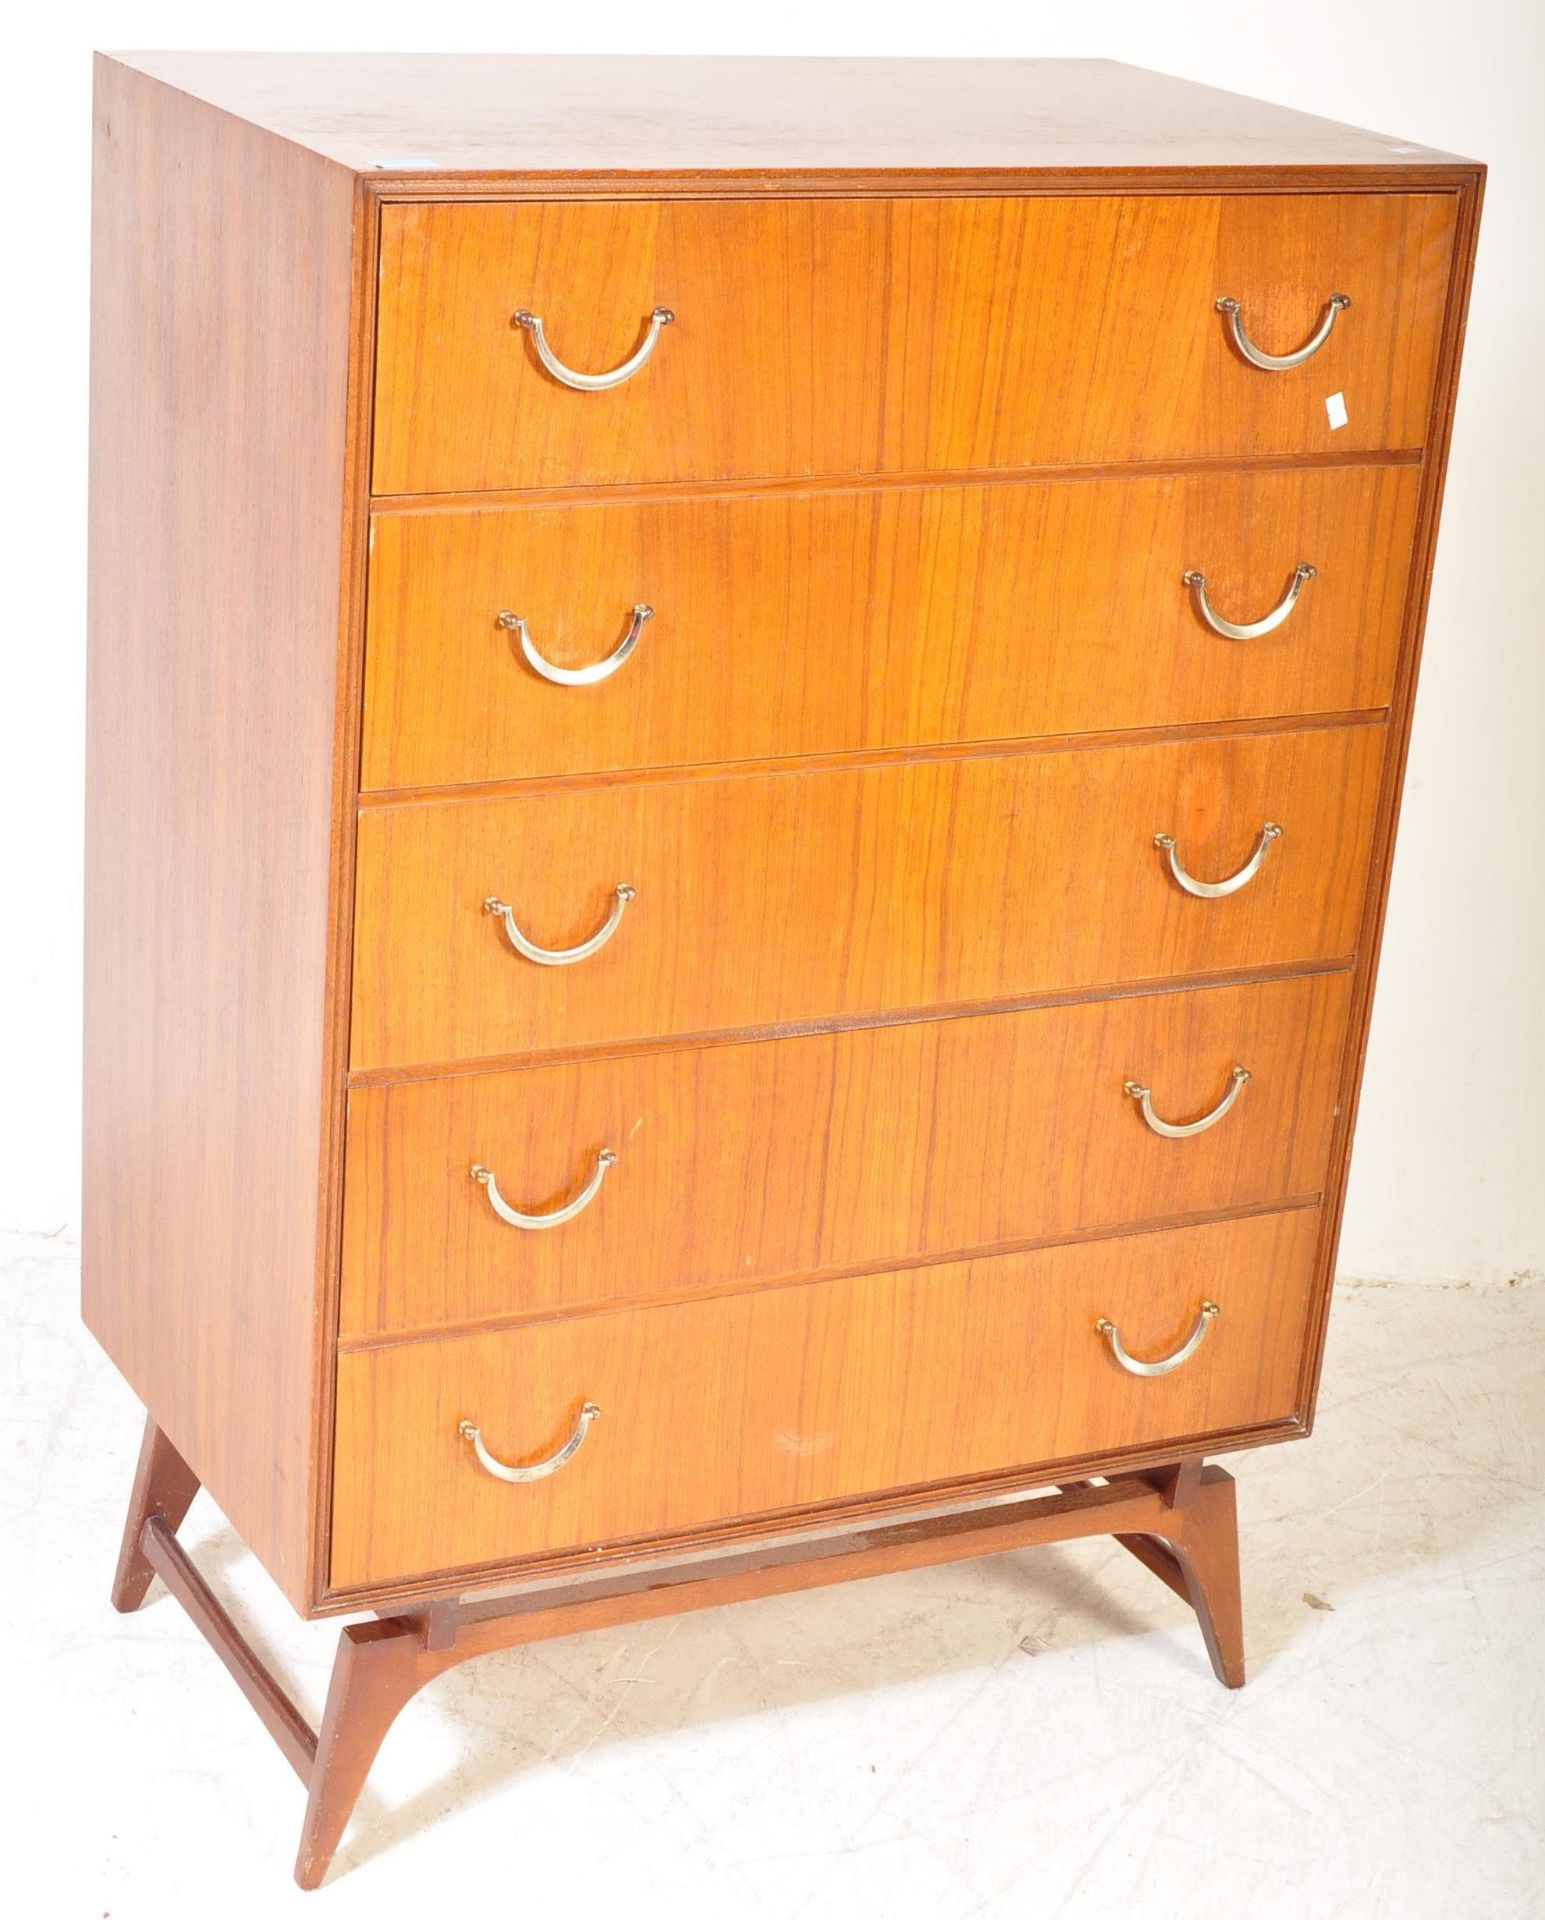 VINTAGE MID 20TH CENTURY MEREDEW CHEST OF DRAWERS - Image 2 of 5